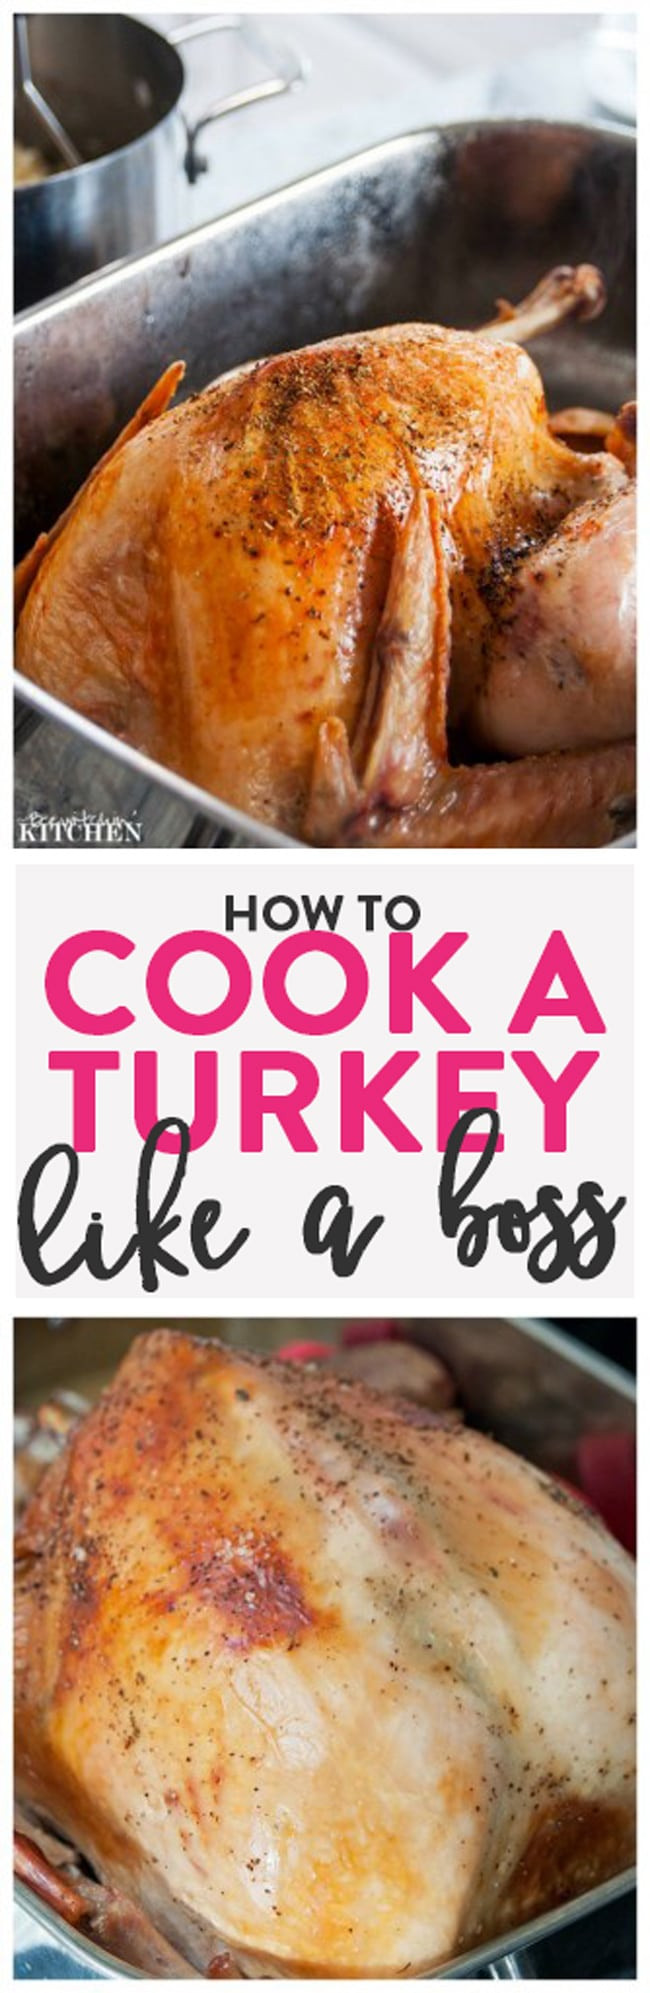 What To Cook For Christmas Dinner
 How To Cook a Turkey Like a Boss